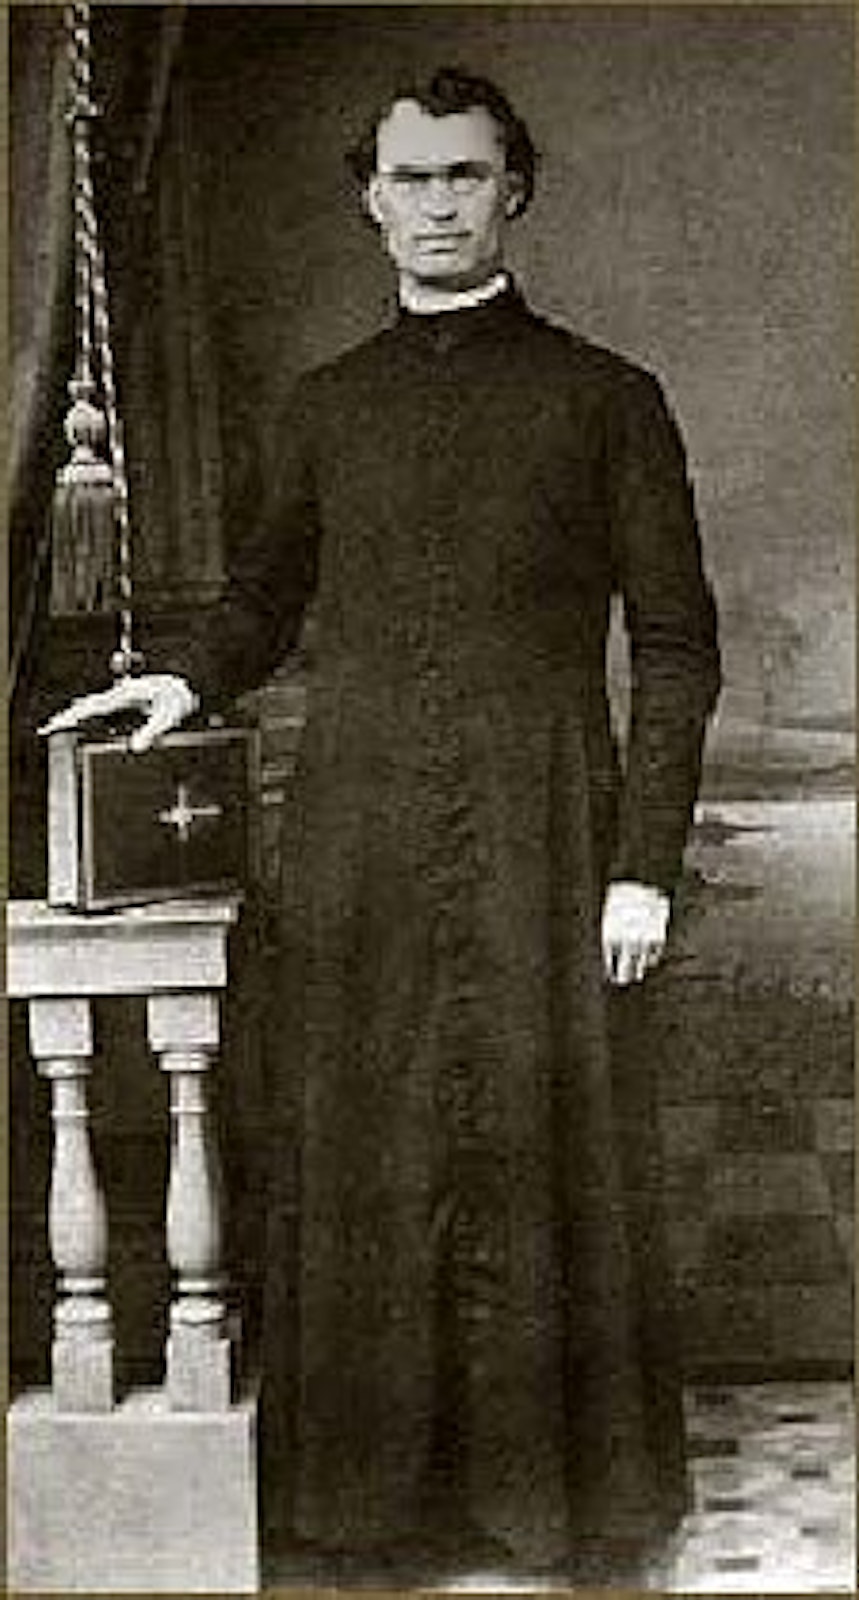 Fr. Patrick Manogue is pictured in the 1860s.